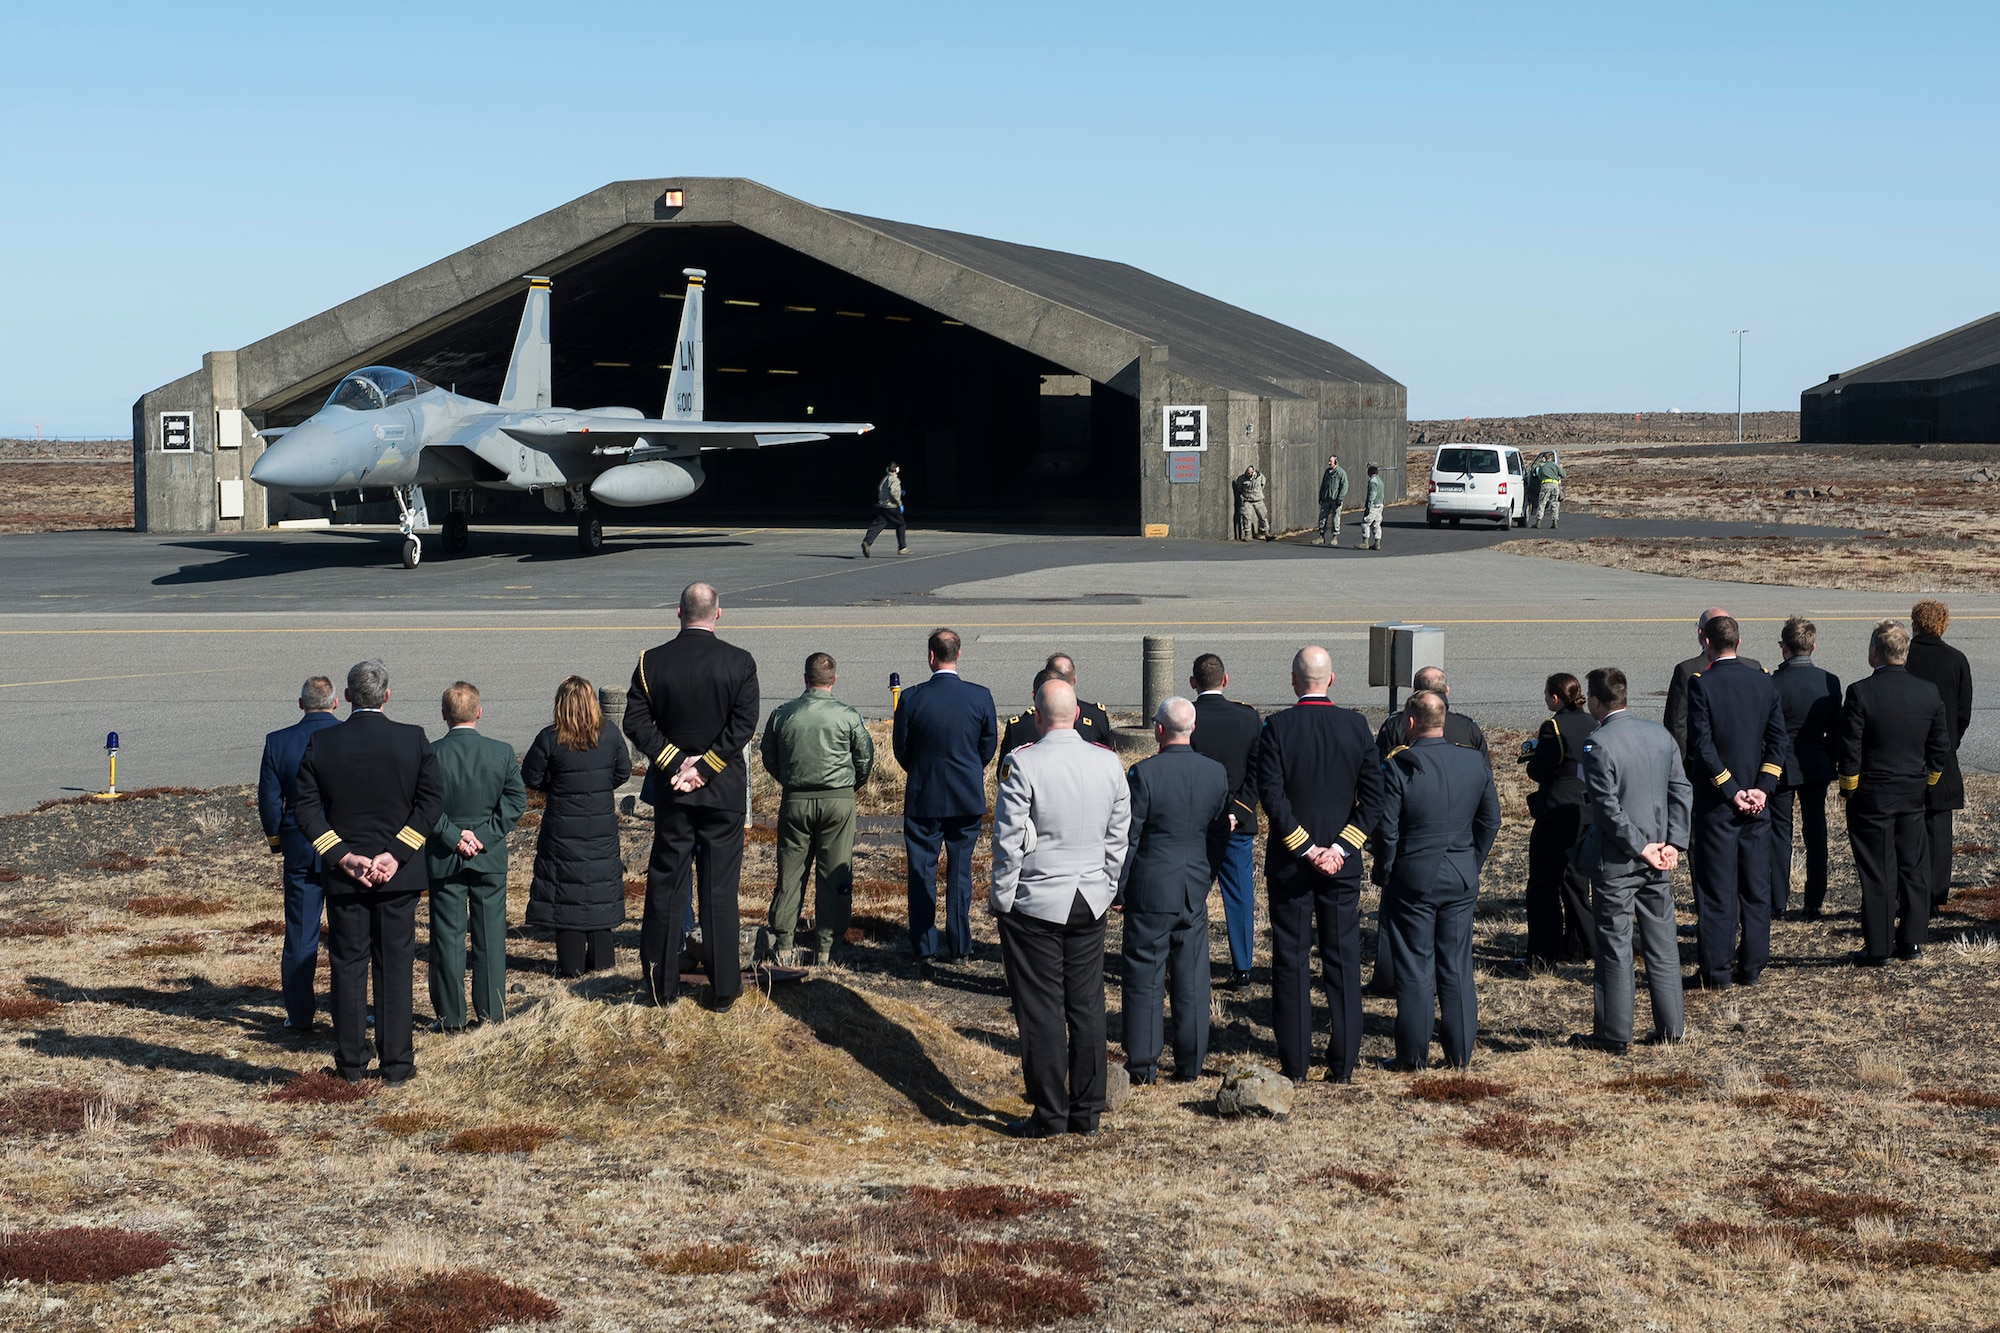 Members of the annual Arctic Security Forces Roundtable watch a training scramble of an F-15C Eagle fighter aircraft at Keflavik International Airport, Iceland. Representatives from 11 nations across Europe and North America met for the ASFR in order to promote regional understanding and enhance multilateral security operations within the Arctic area. (U.S. Air Force photo by Staff Sgt. Chad Warren/Released)